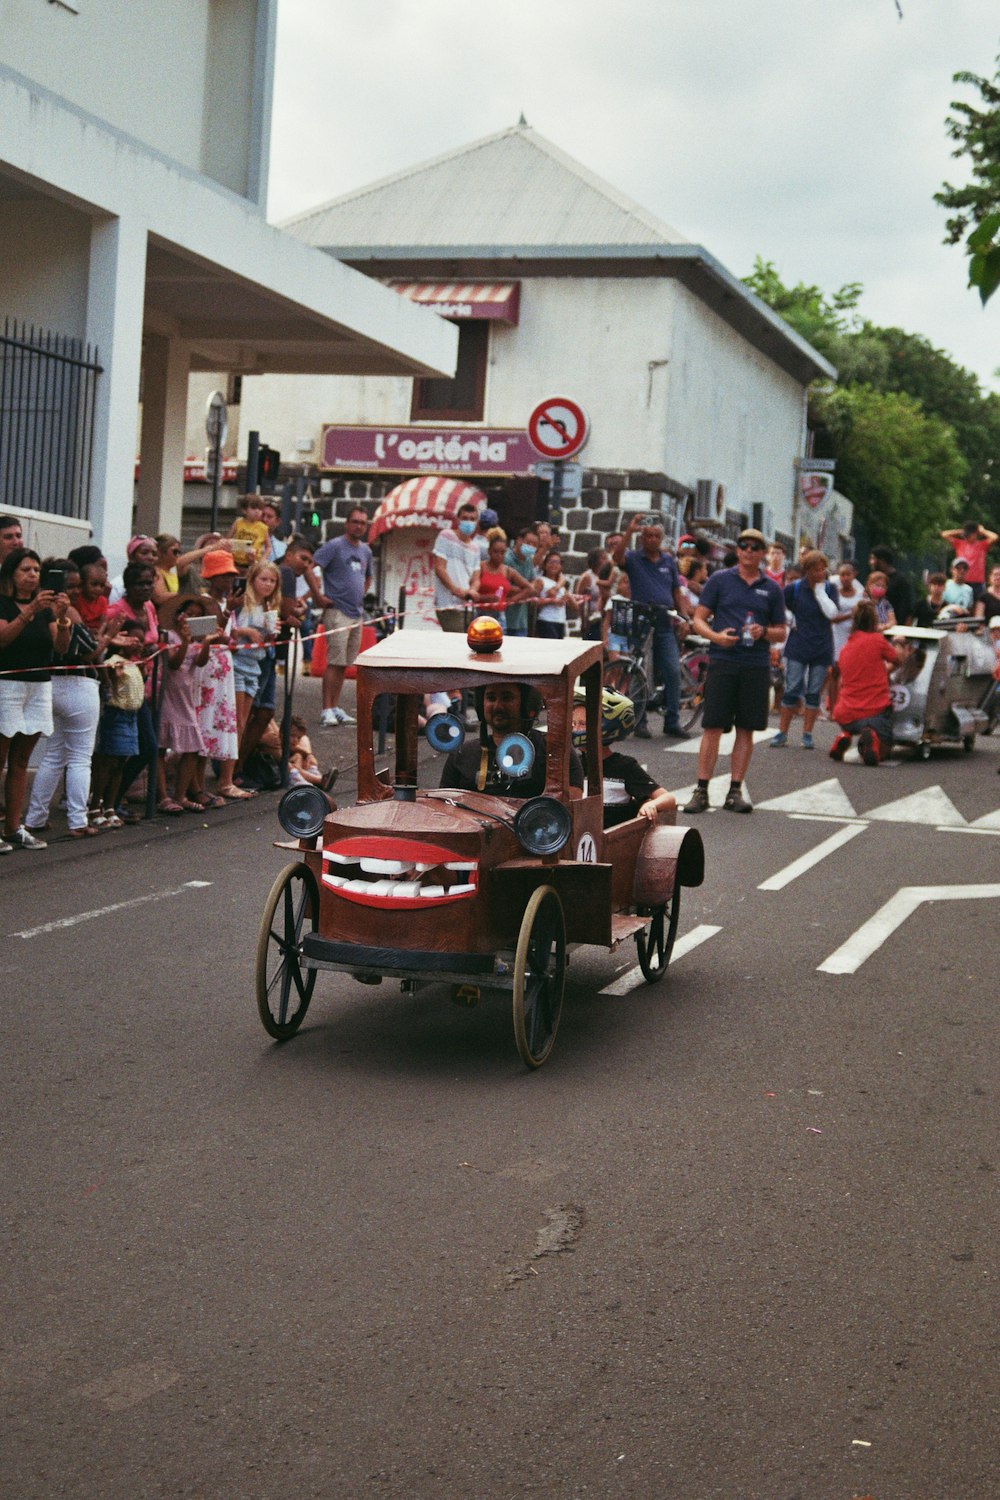 a parade with cars and people on the street